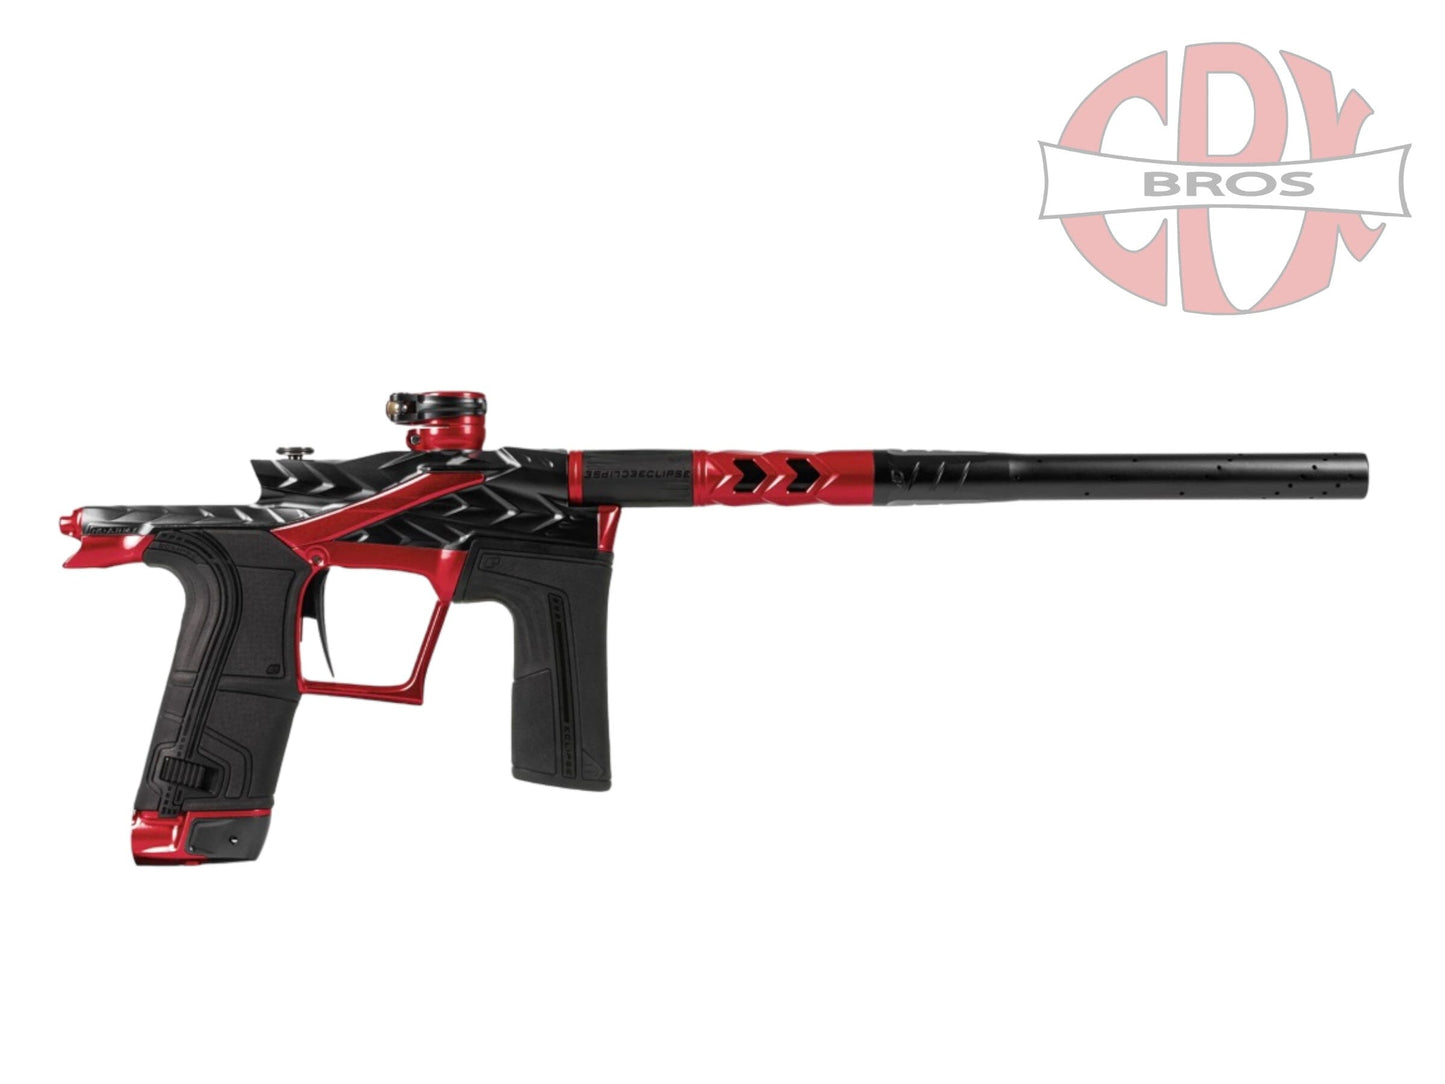 Used NEW HK FOSSIL- ECLIPSE LV2 - Lava Paintball Gun from CPXBrosPaintball Buy/Sell/Trade Paintball Markers, New Paintball Guns, Paintball Hoppers, Paintball Masks, and Hormesis Headbands